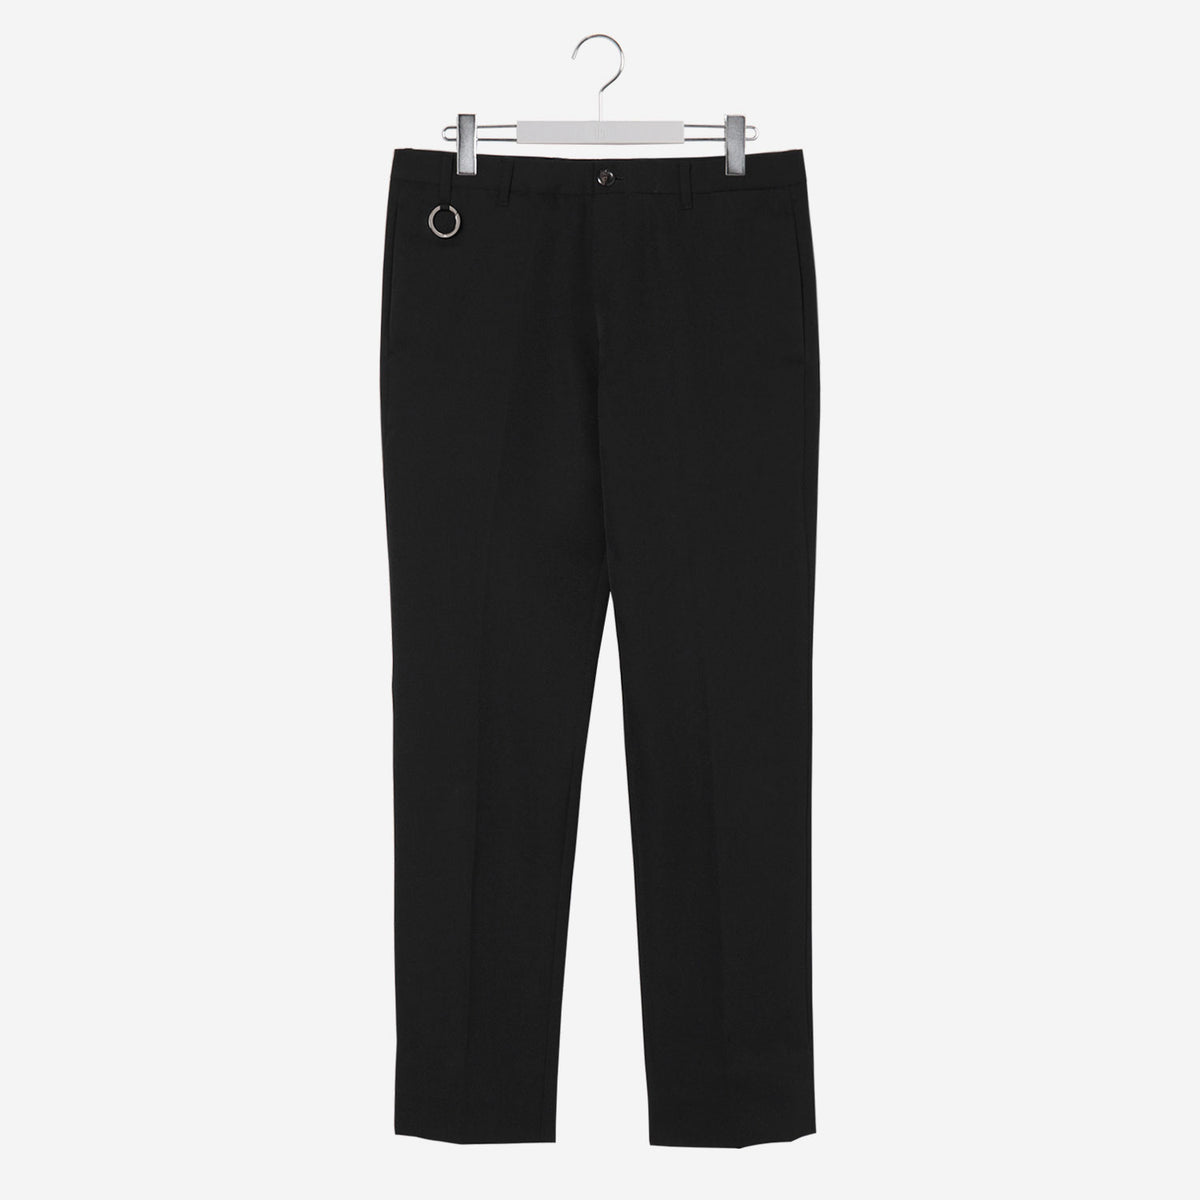 LOWITT / Slim Tailored Pants / black – th products